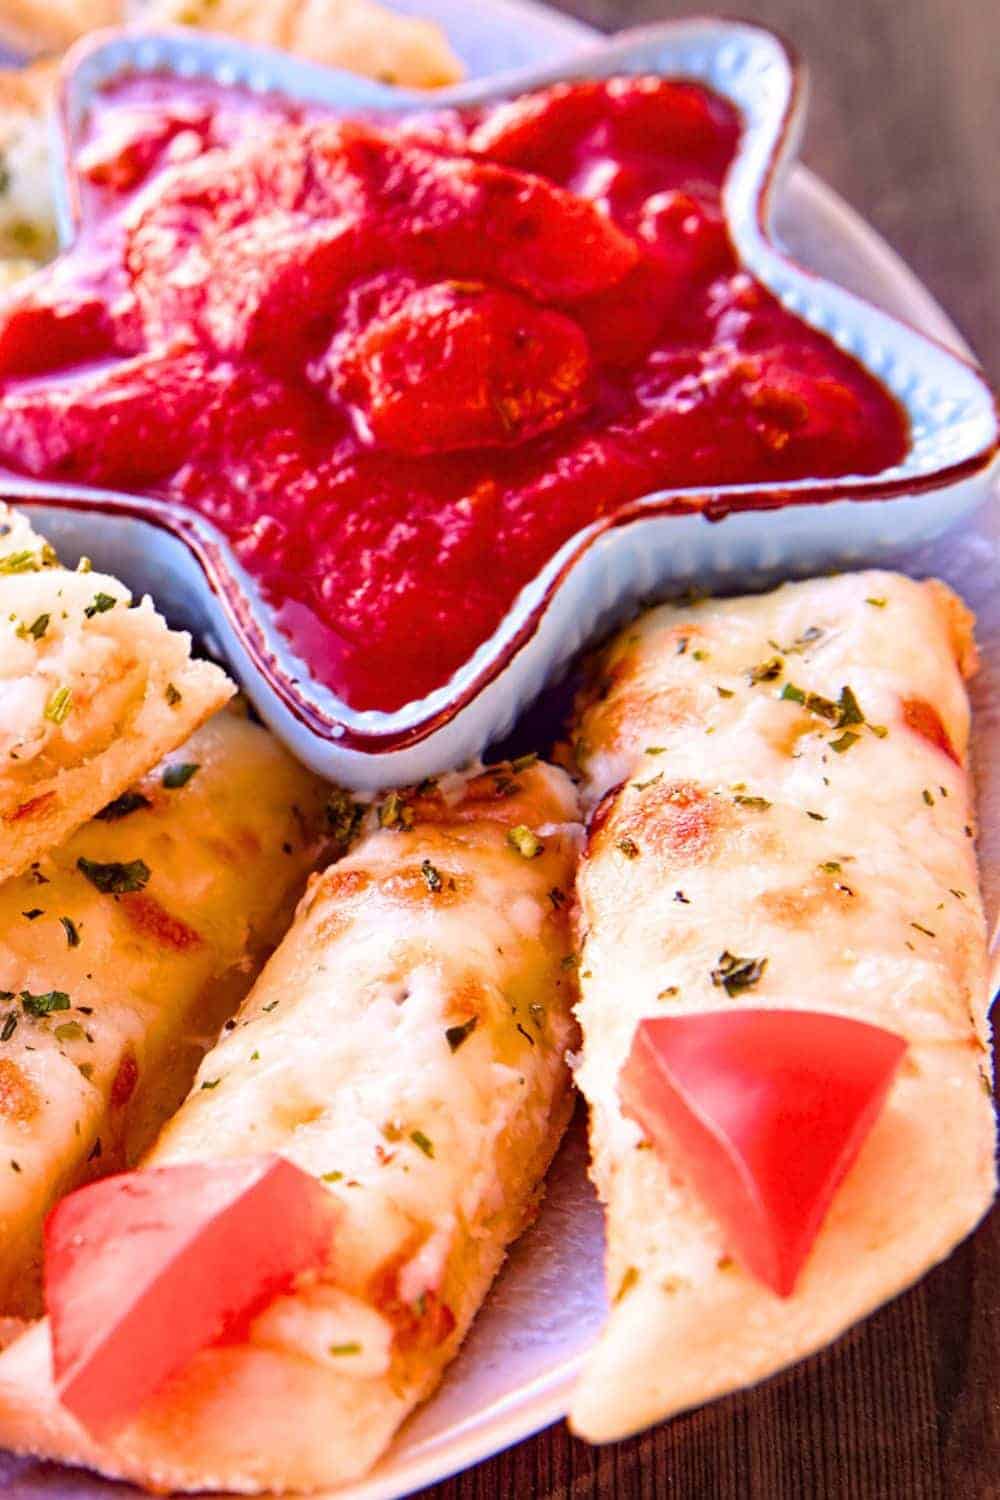 Zombie Food Pizza Fingers (Zombie Party Recipes) - pizza sticks that look like zombie fingers with a side of marinara sauce on a plate